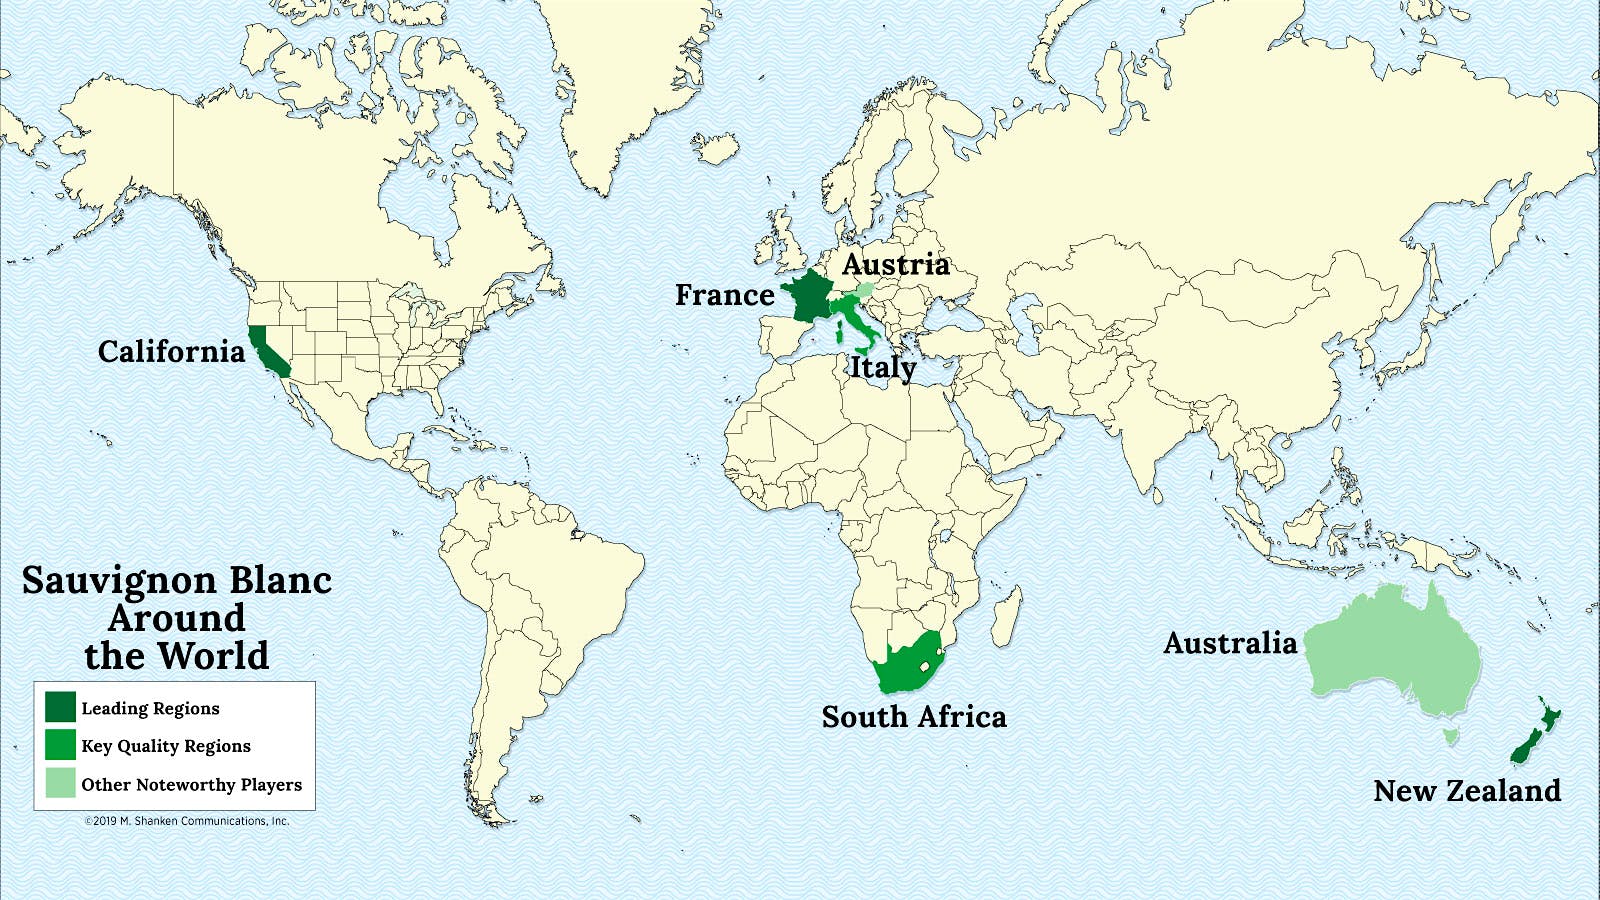 A map of the world with France, New Zealand, California, South Africa, Italy, Austria and Australia highlighted